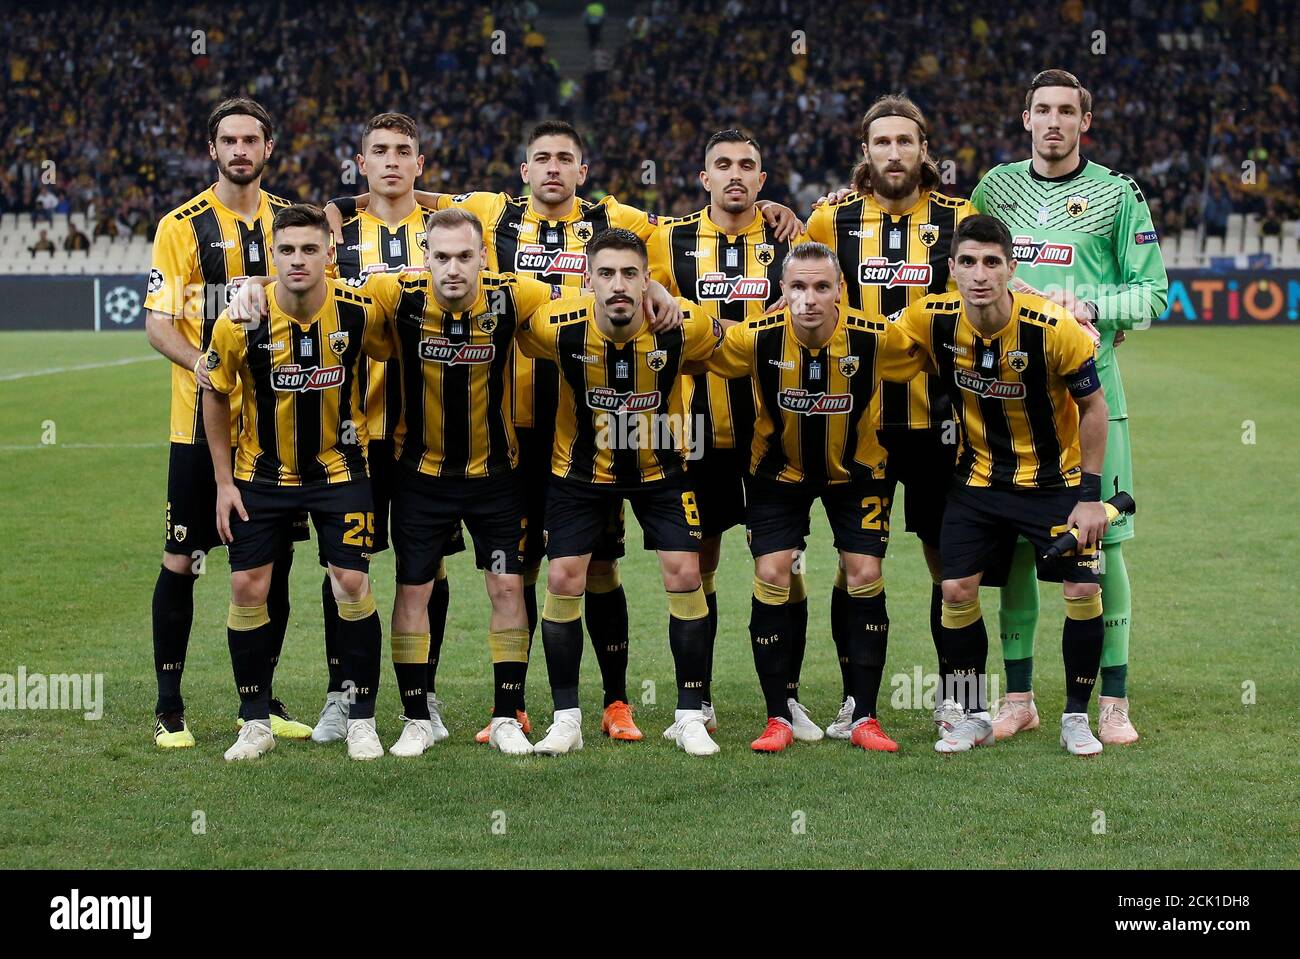 Soccer Football - Champions League - Group Stage - Group E - AEK Athens v  Benfica - OAKA Spiros Louis, Athens, Greece - October 2, 2018 AEK Athens  players pose for a